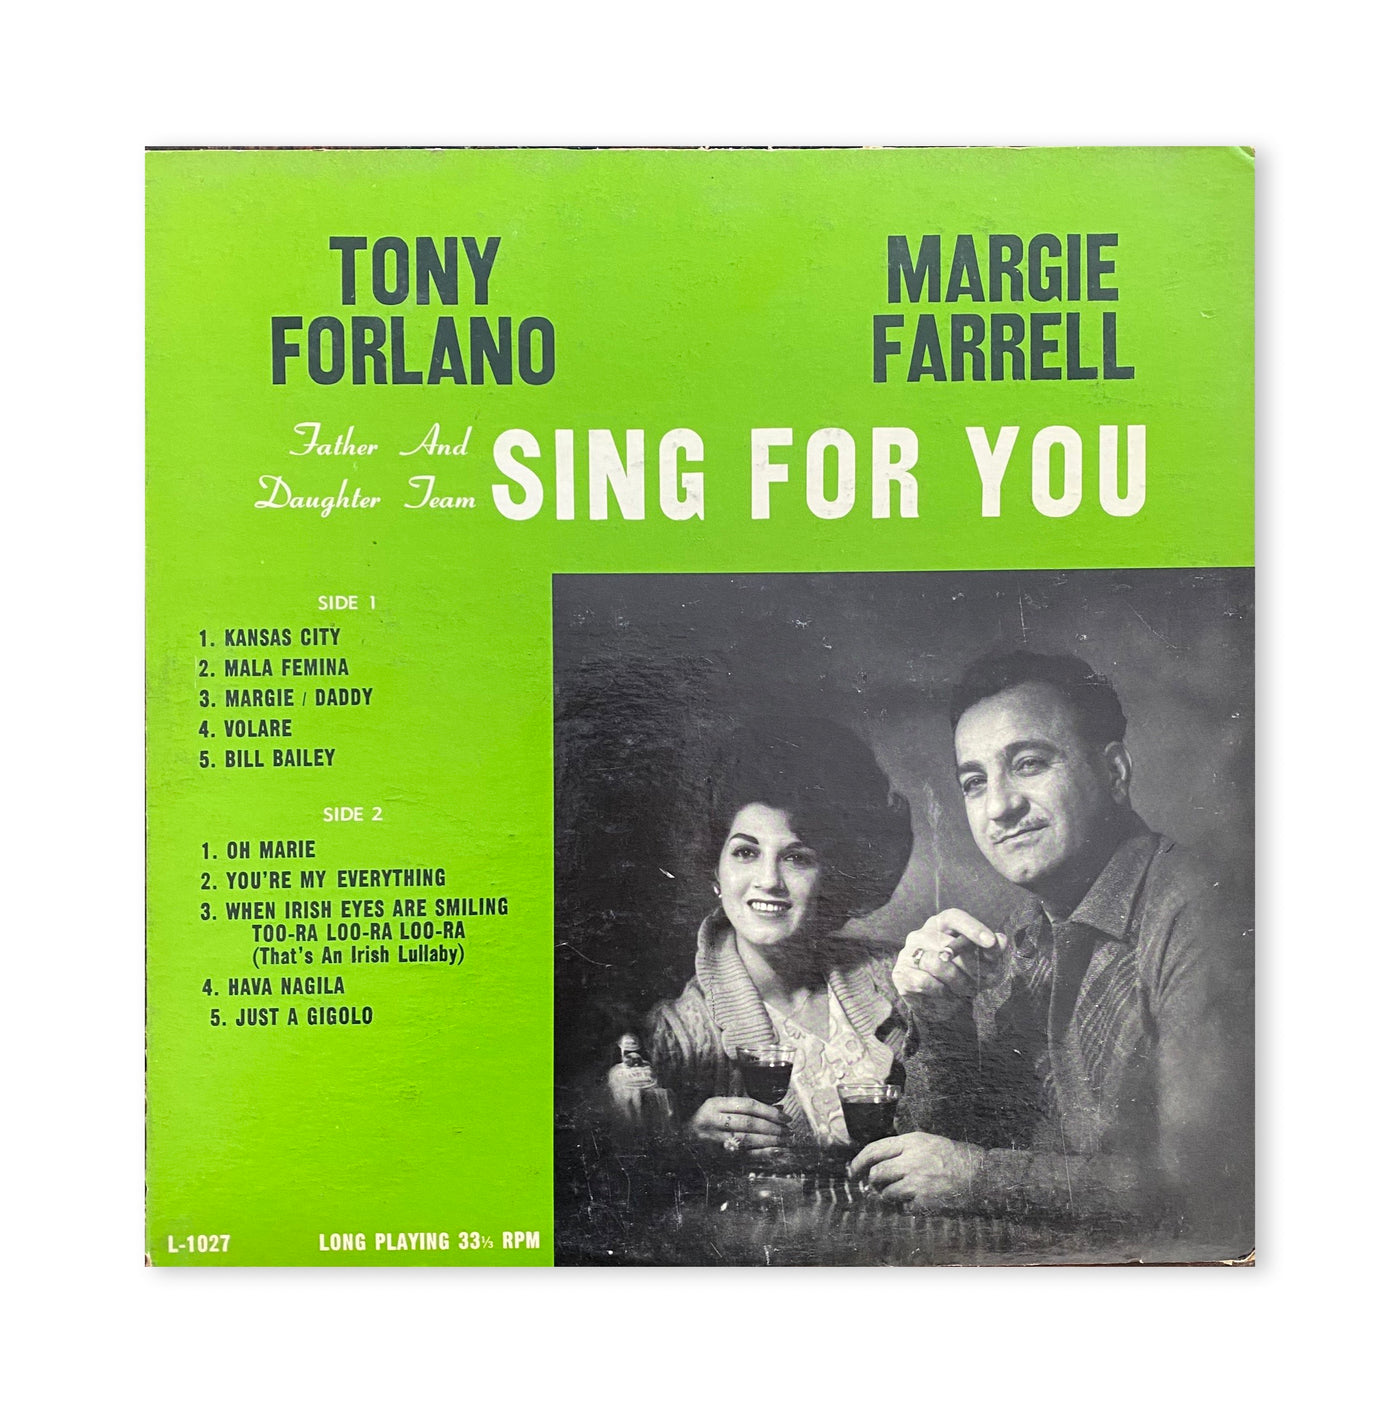 Tony Forlano & Margie Farrell - Sing For You